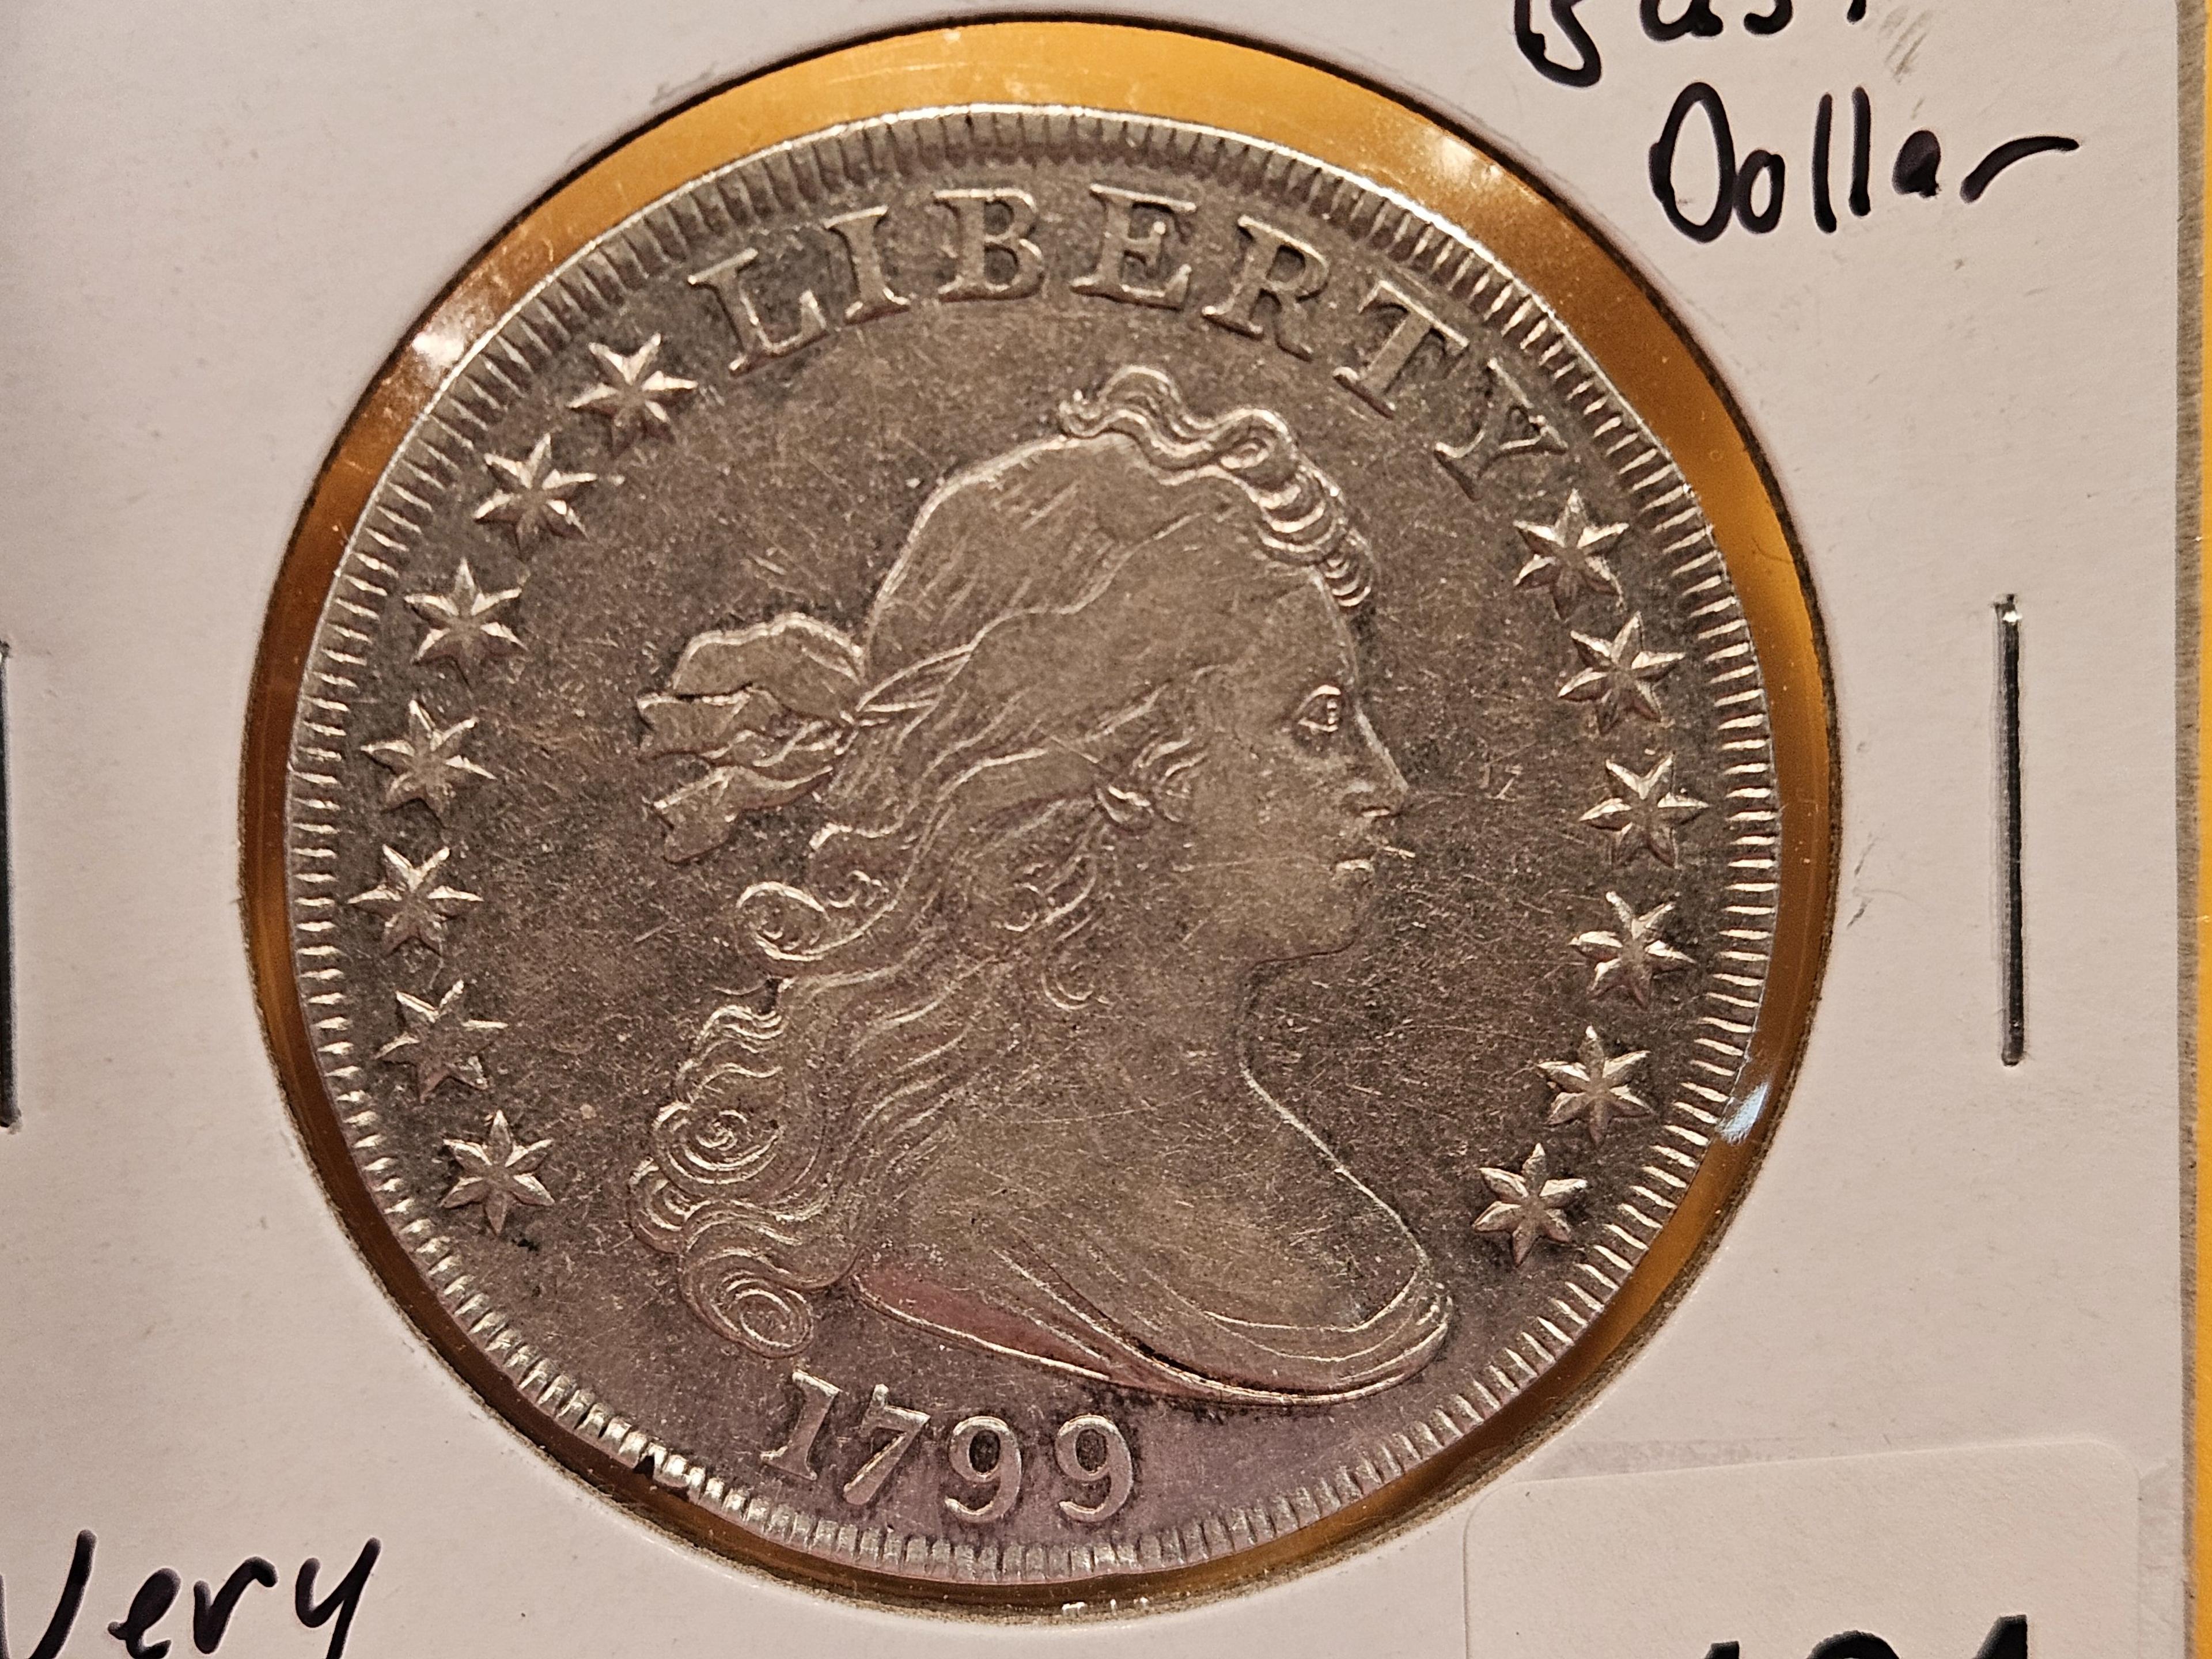 *** AUCTION HIGHLIGHT **** 1799 Draped Bust Dollar in Very Fine plus